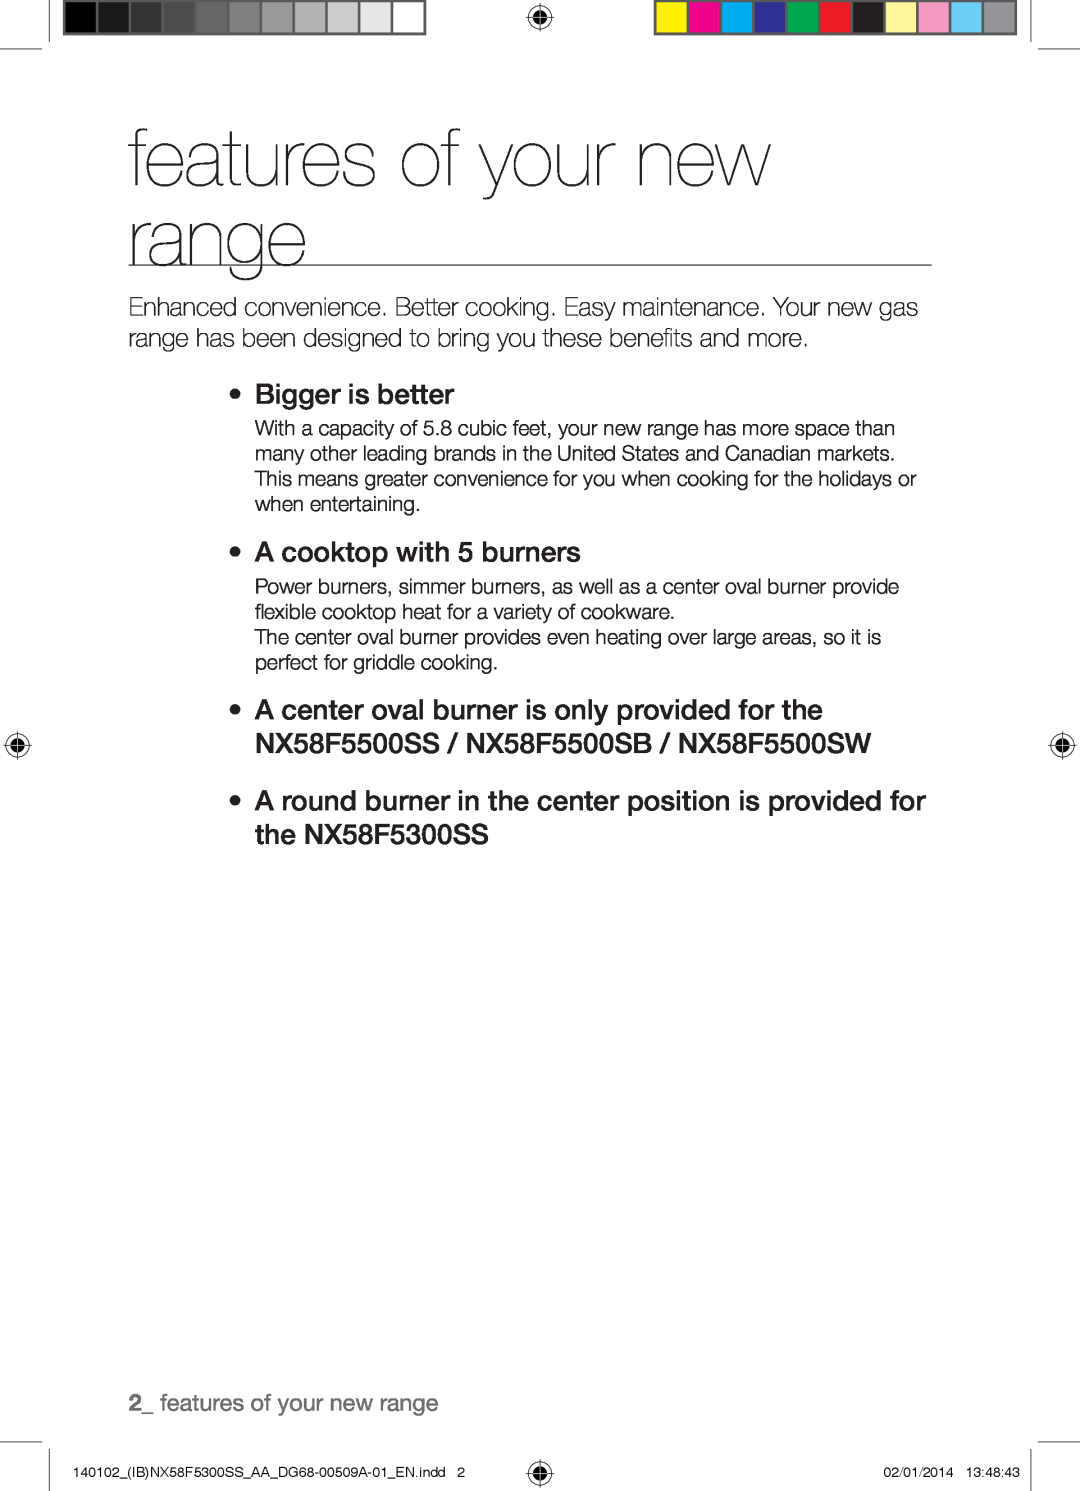 Samsung NX58F5500SW user manual features of your new range, Bigger is better, A cooktop with 5 burners 